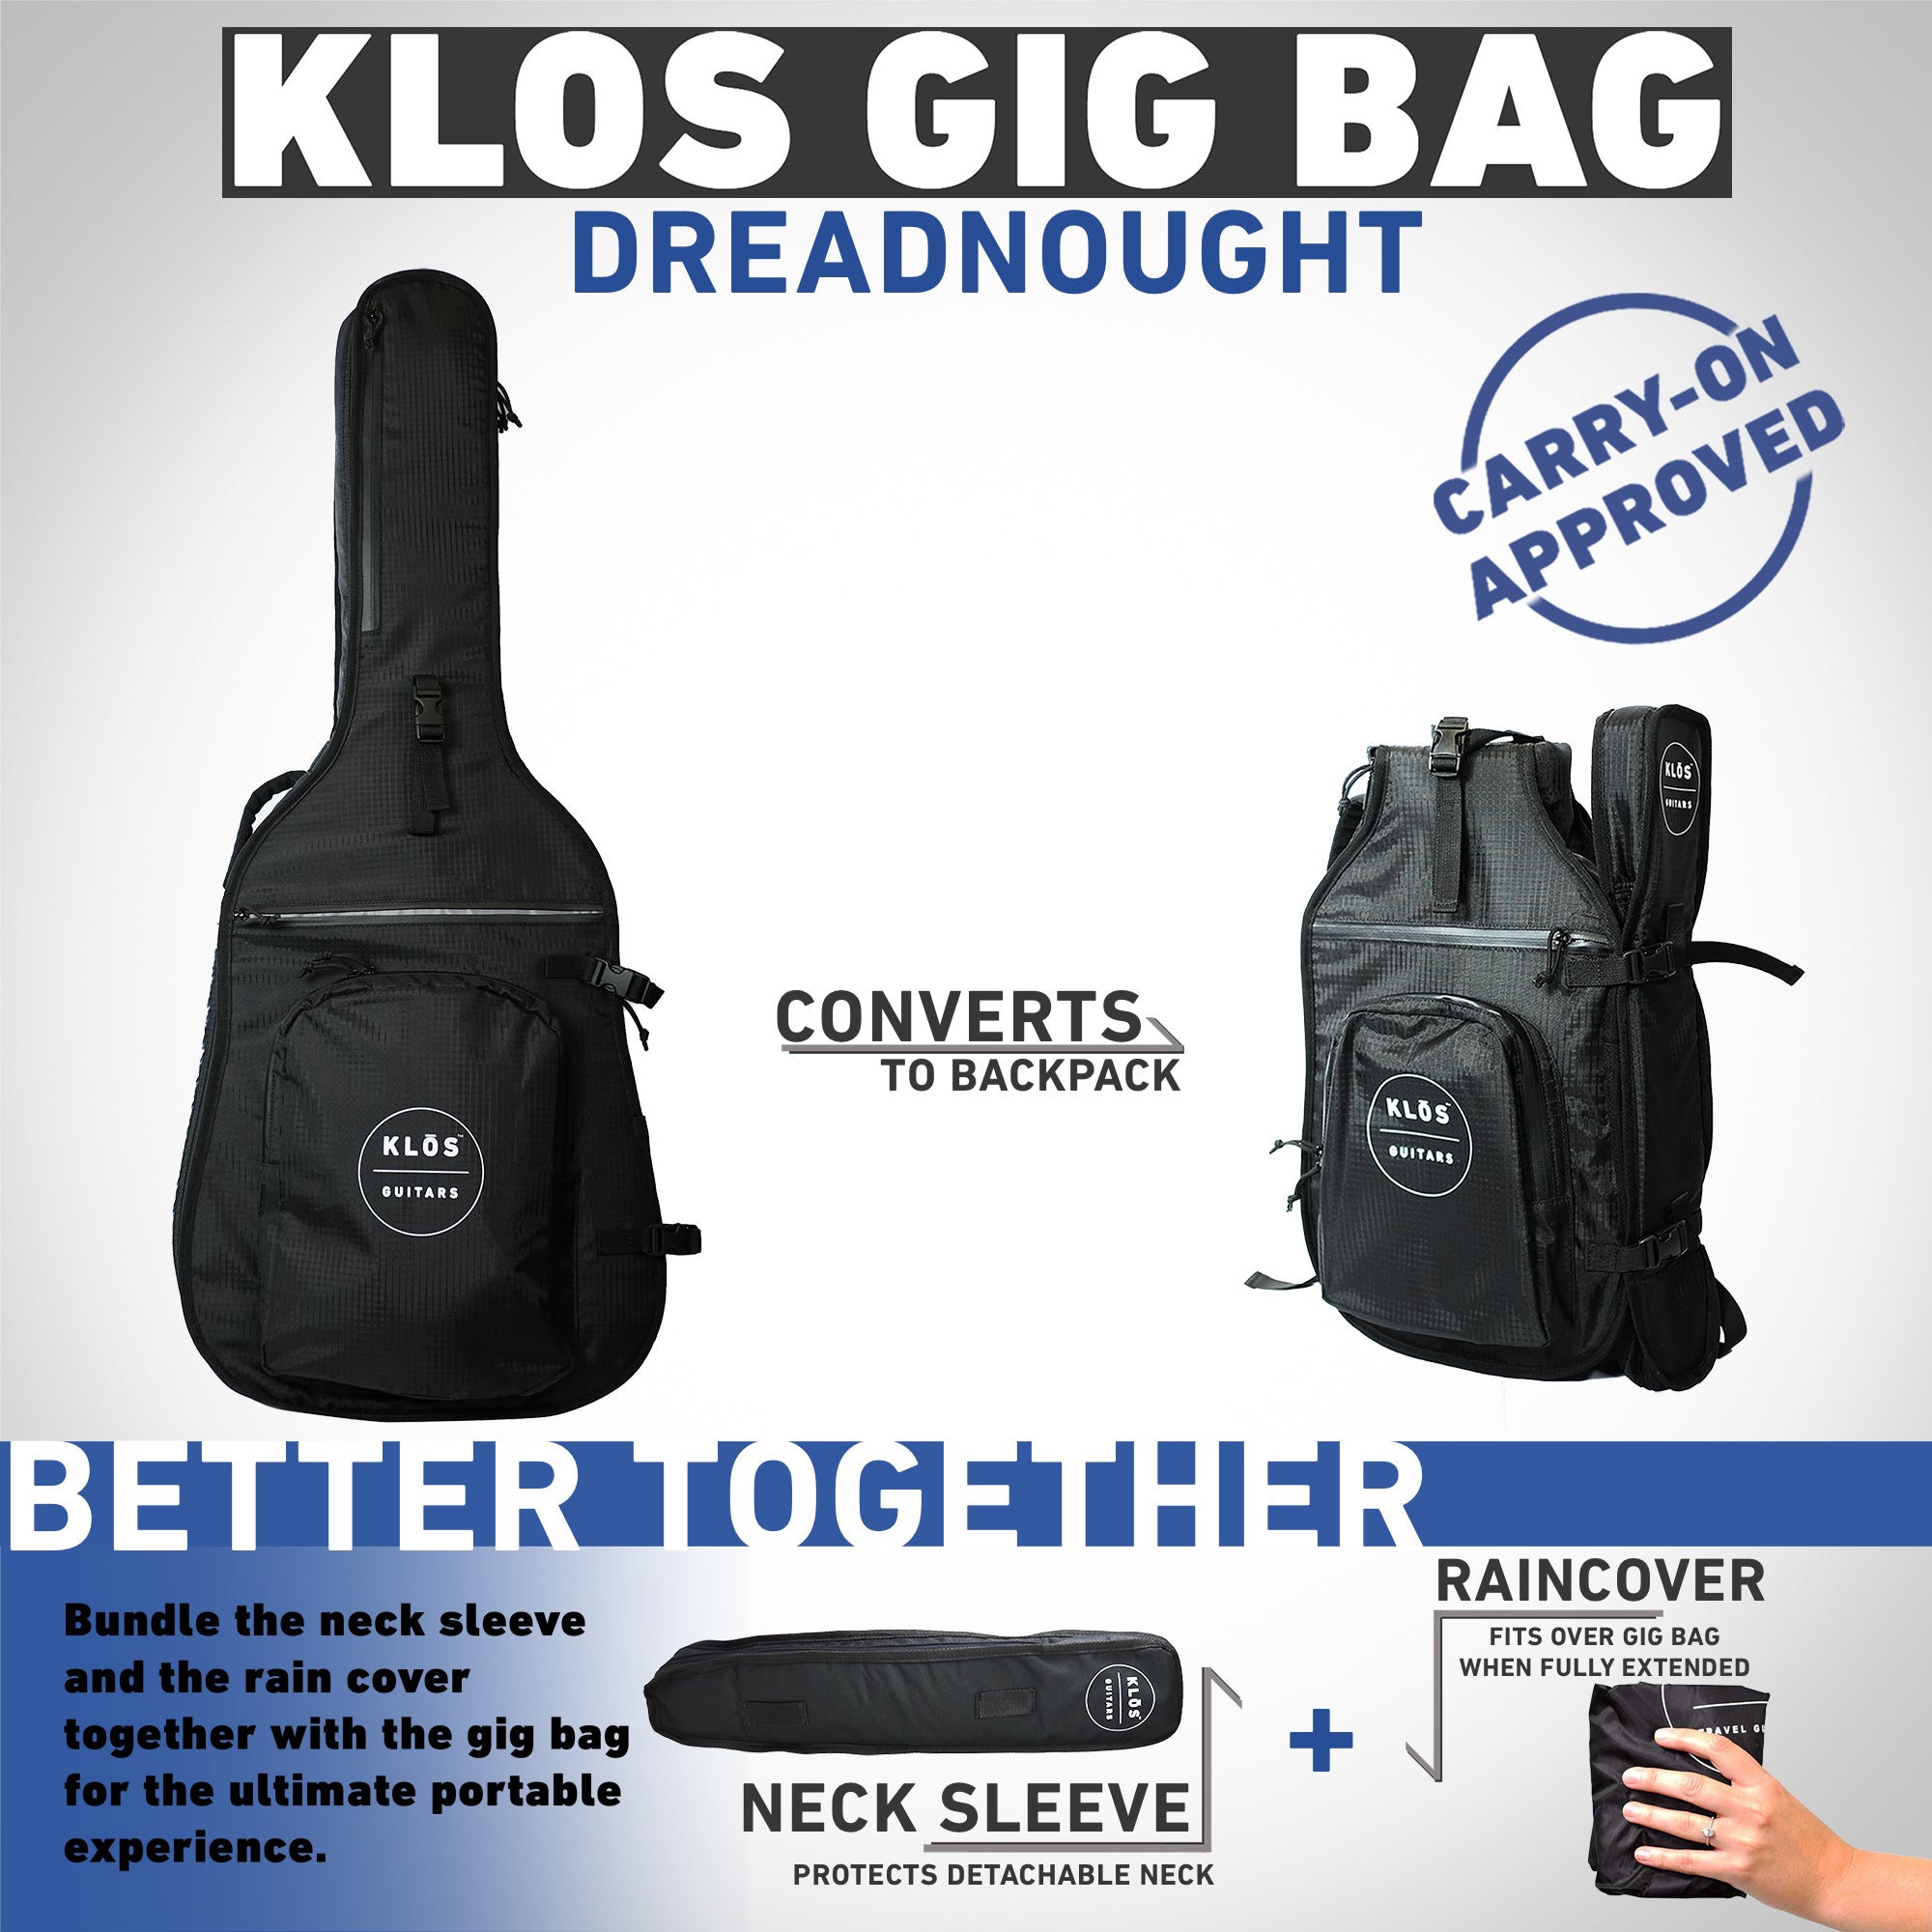 KLŌS Full Size gig bag converts into a back pack. Carry on approved. Bundle with a neck sleeve and rain cover